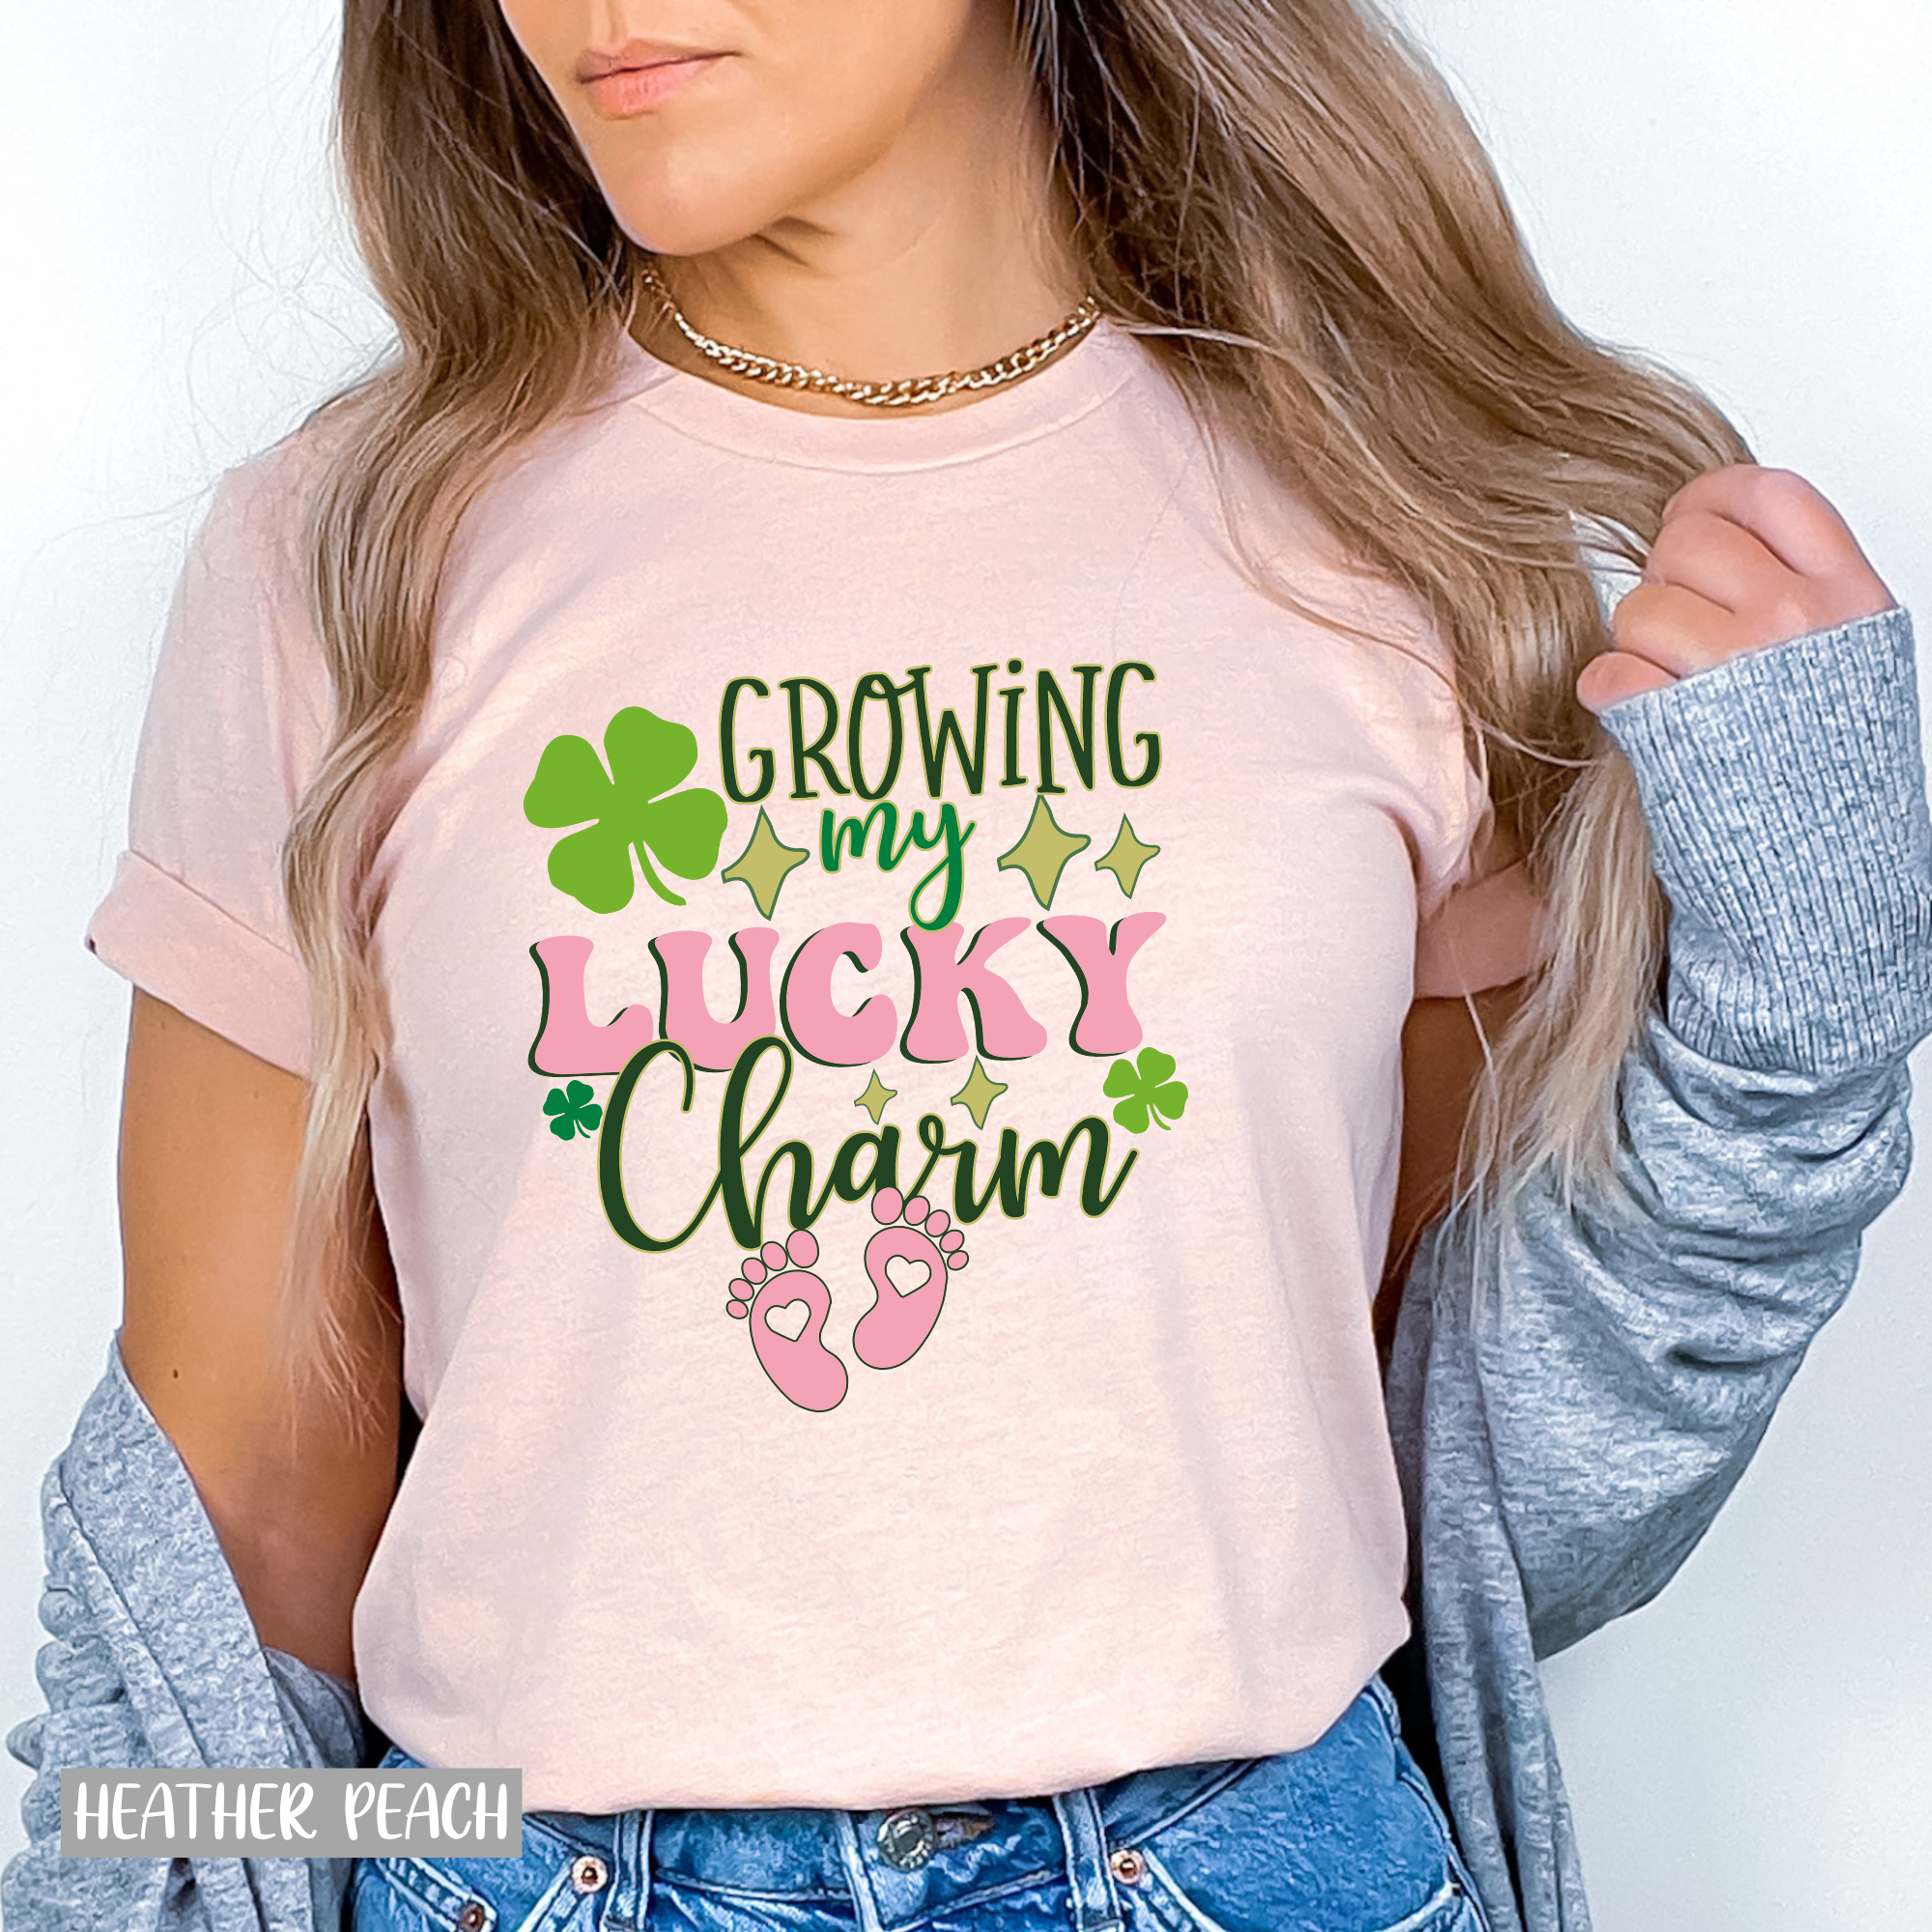 Growing Lucky Charm Pregnancy Announcement - Baby Reveal Tees